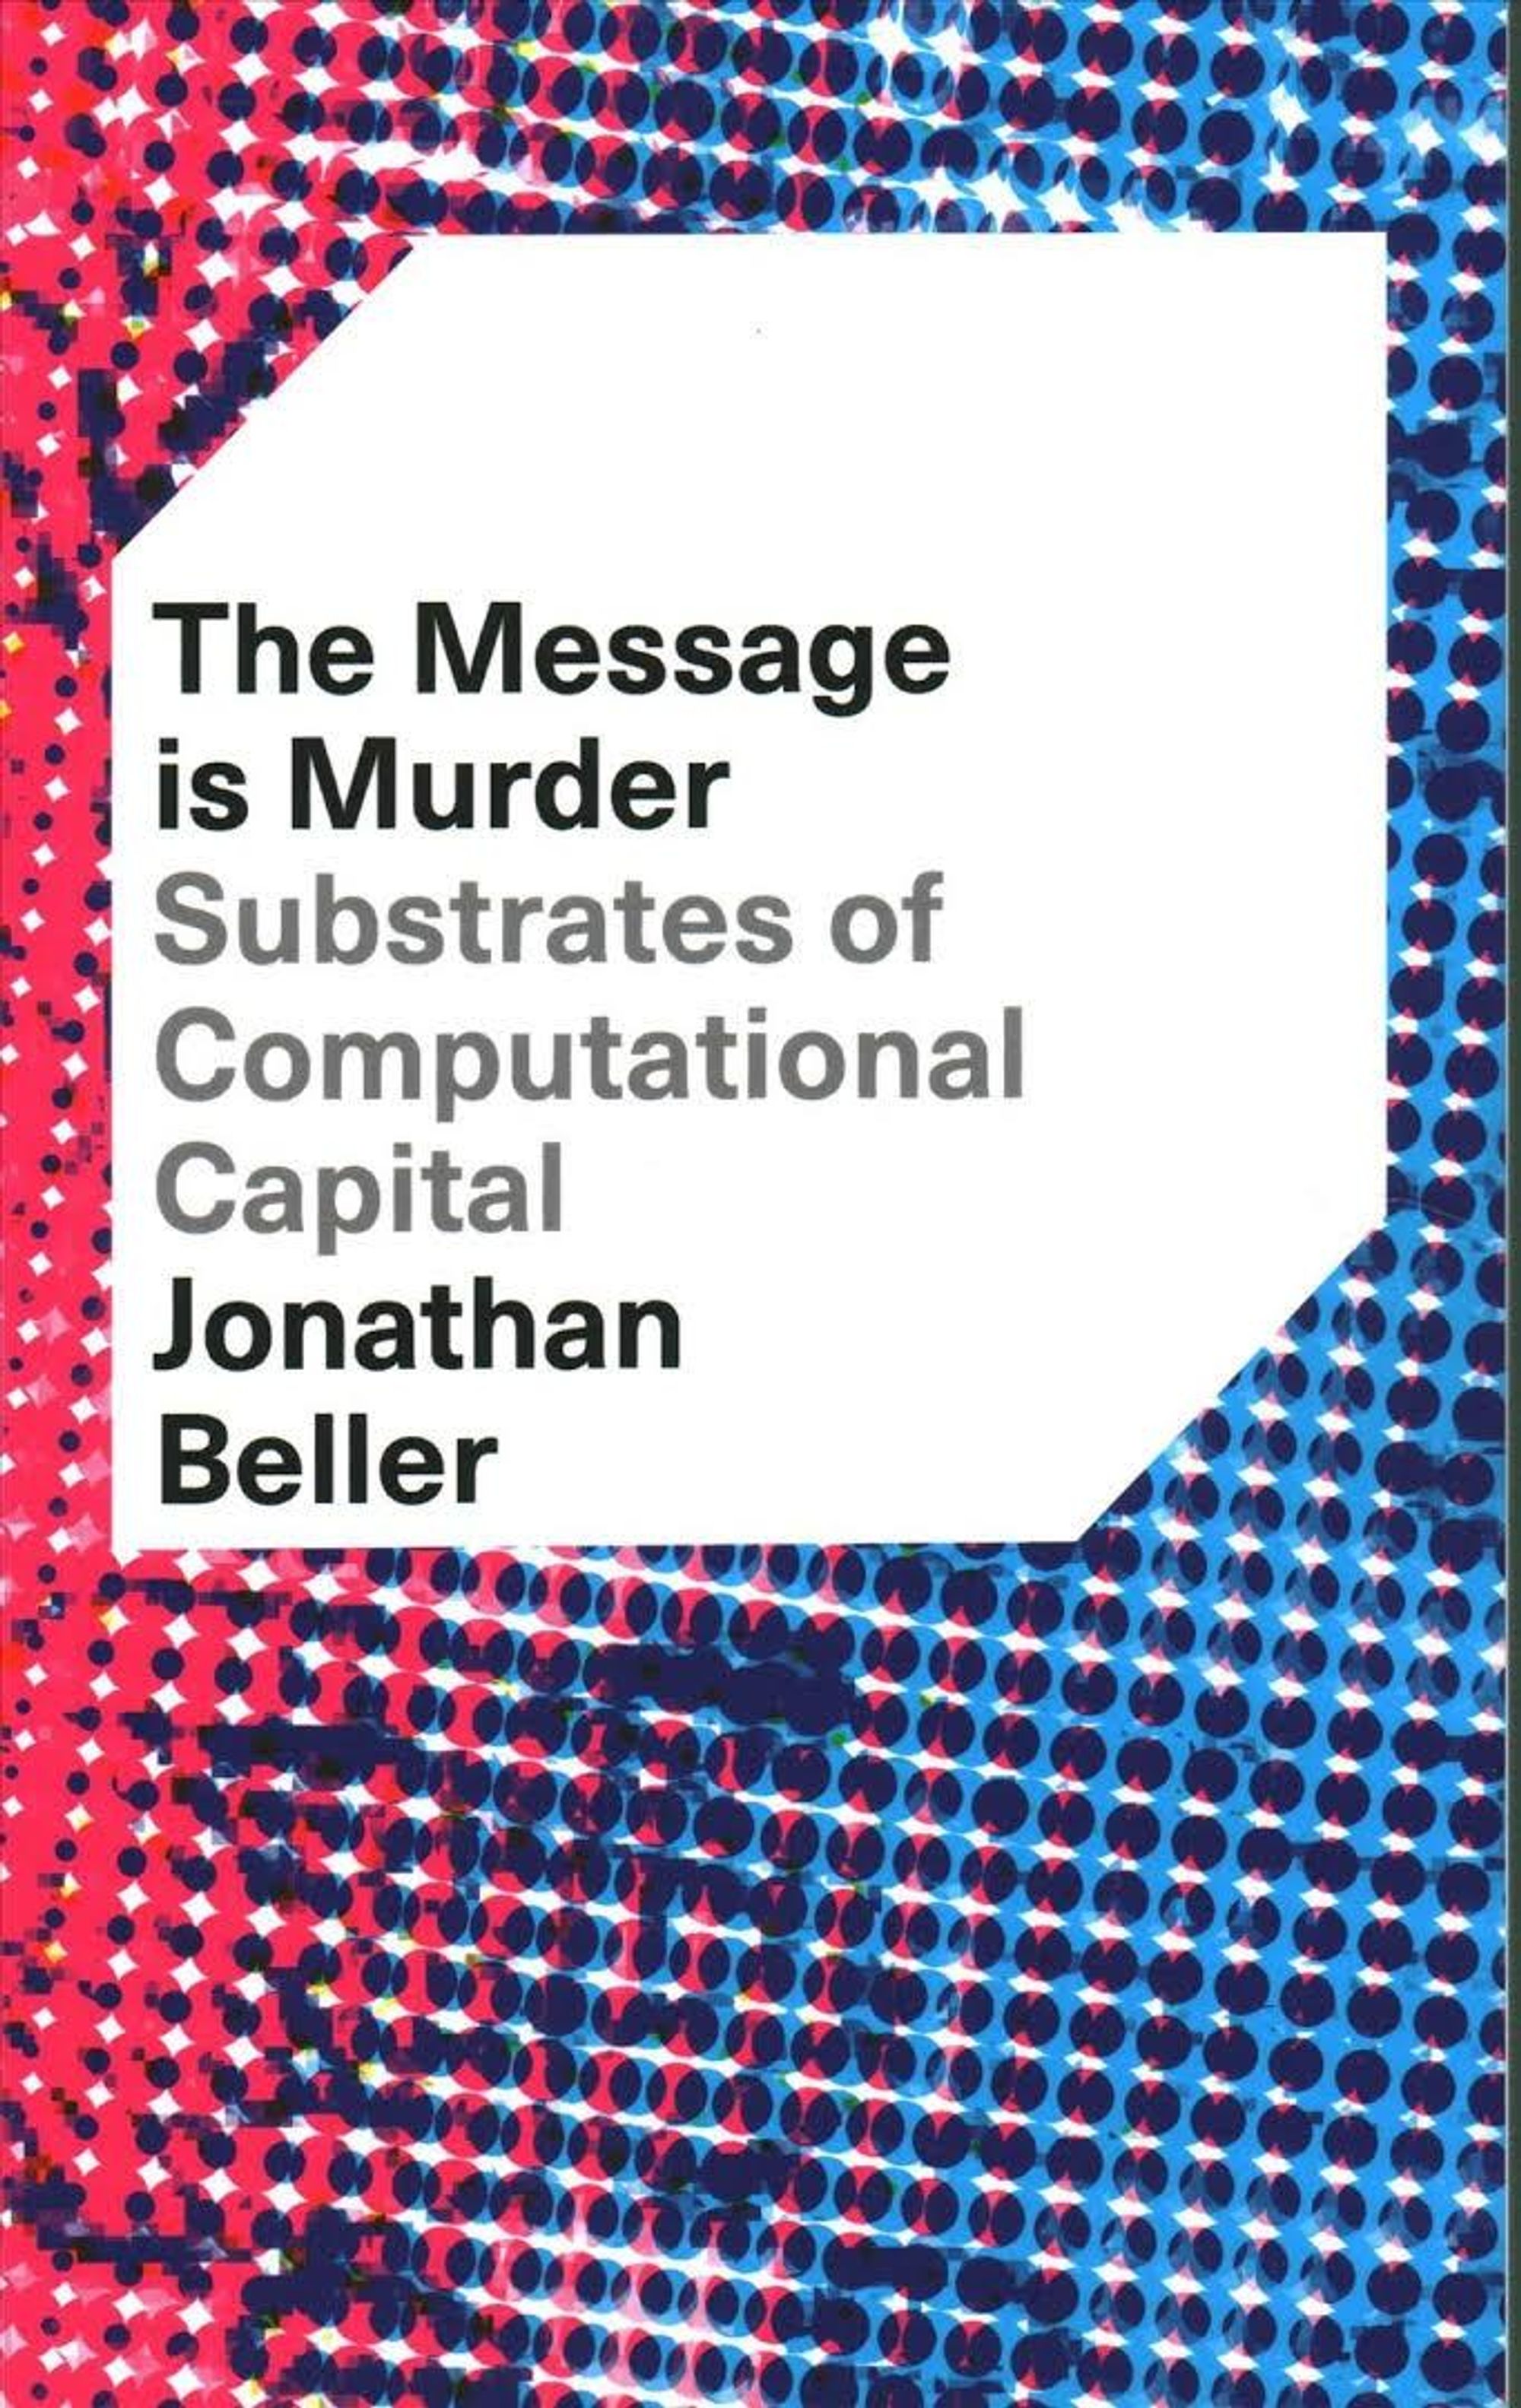 Review: The Message is Murder: Substrates of Computational Capital by Jonathan Beller